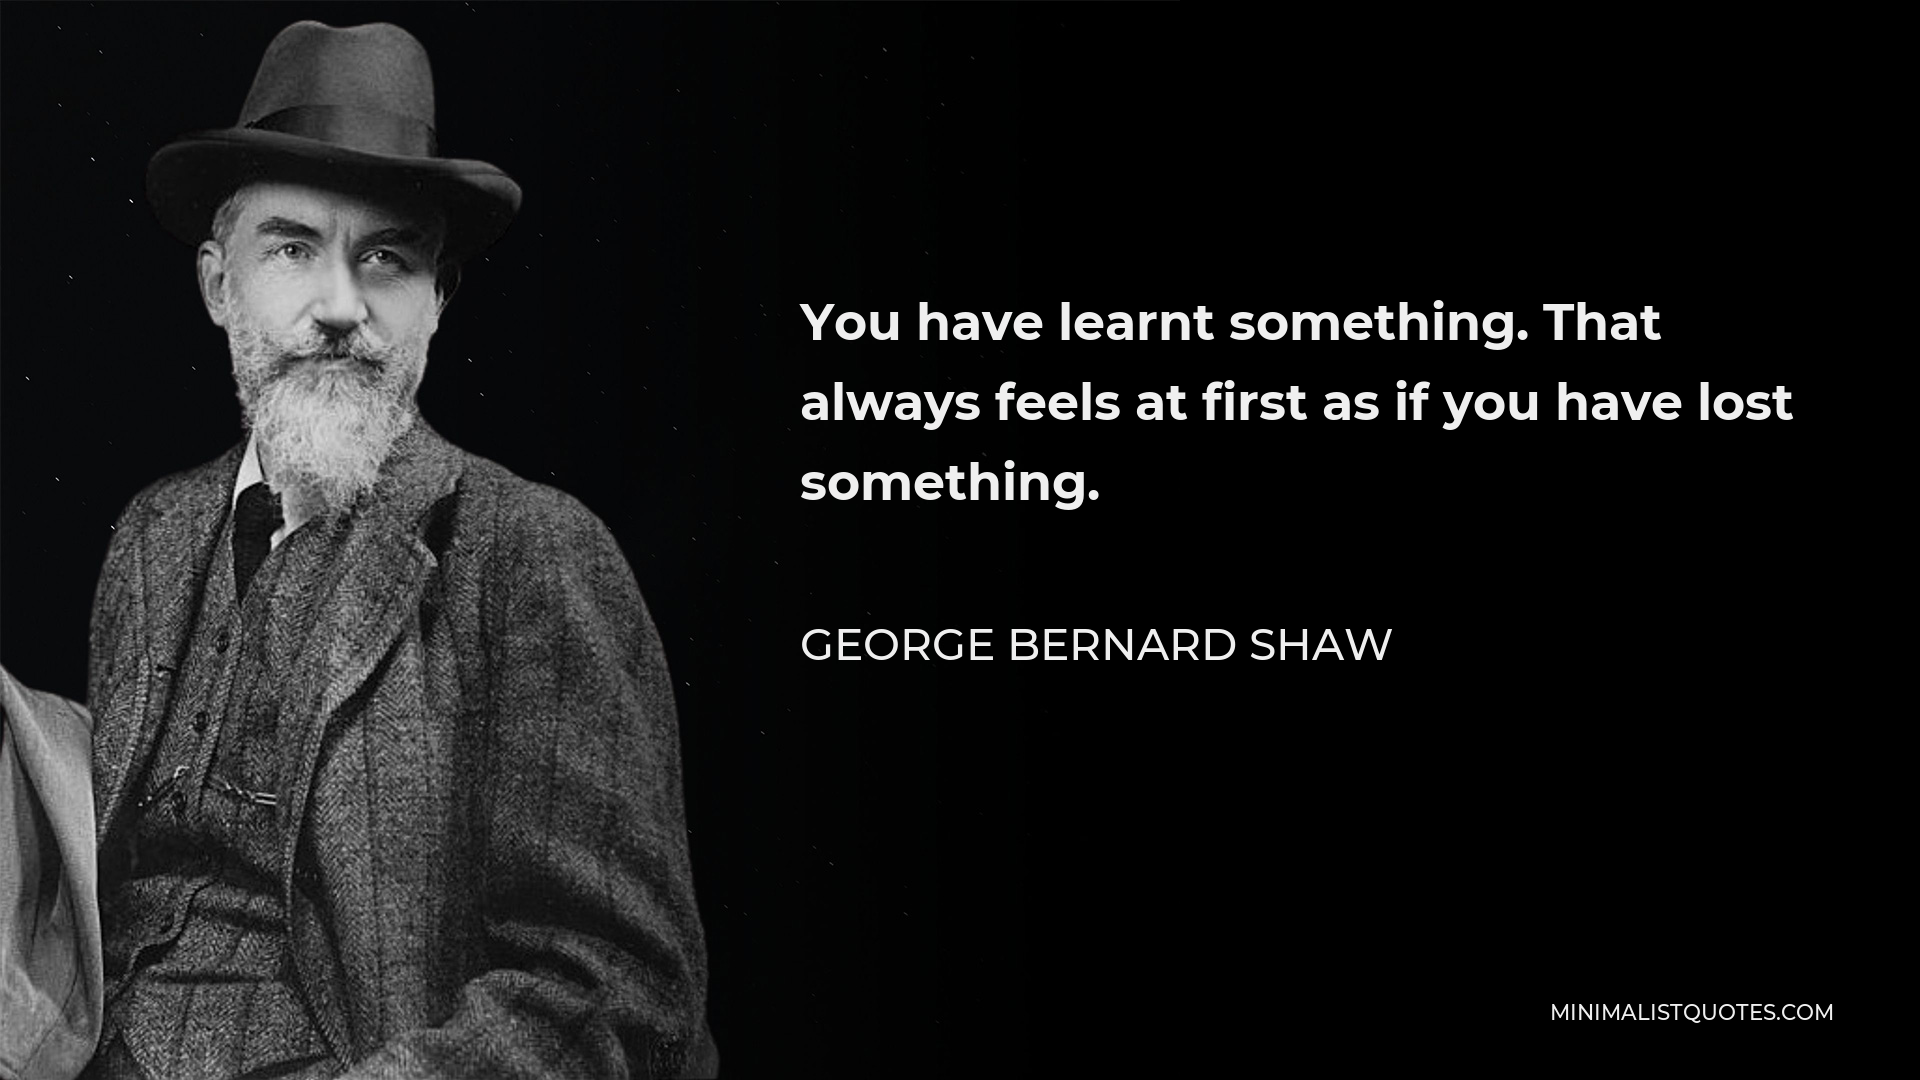 George Bernard Shaw Quote - You have learnt something. That always feels at first as if you have lost something.